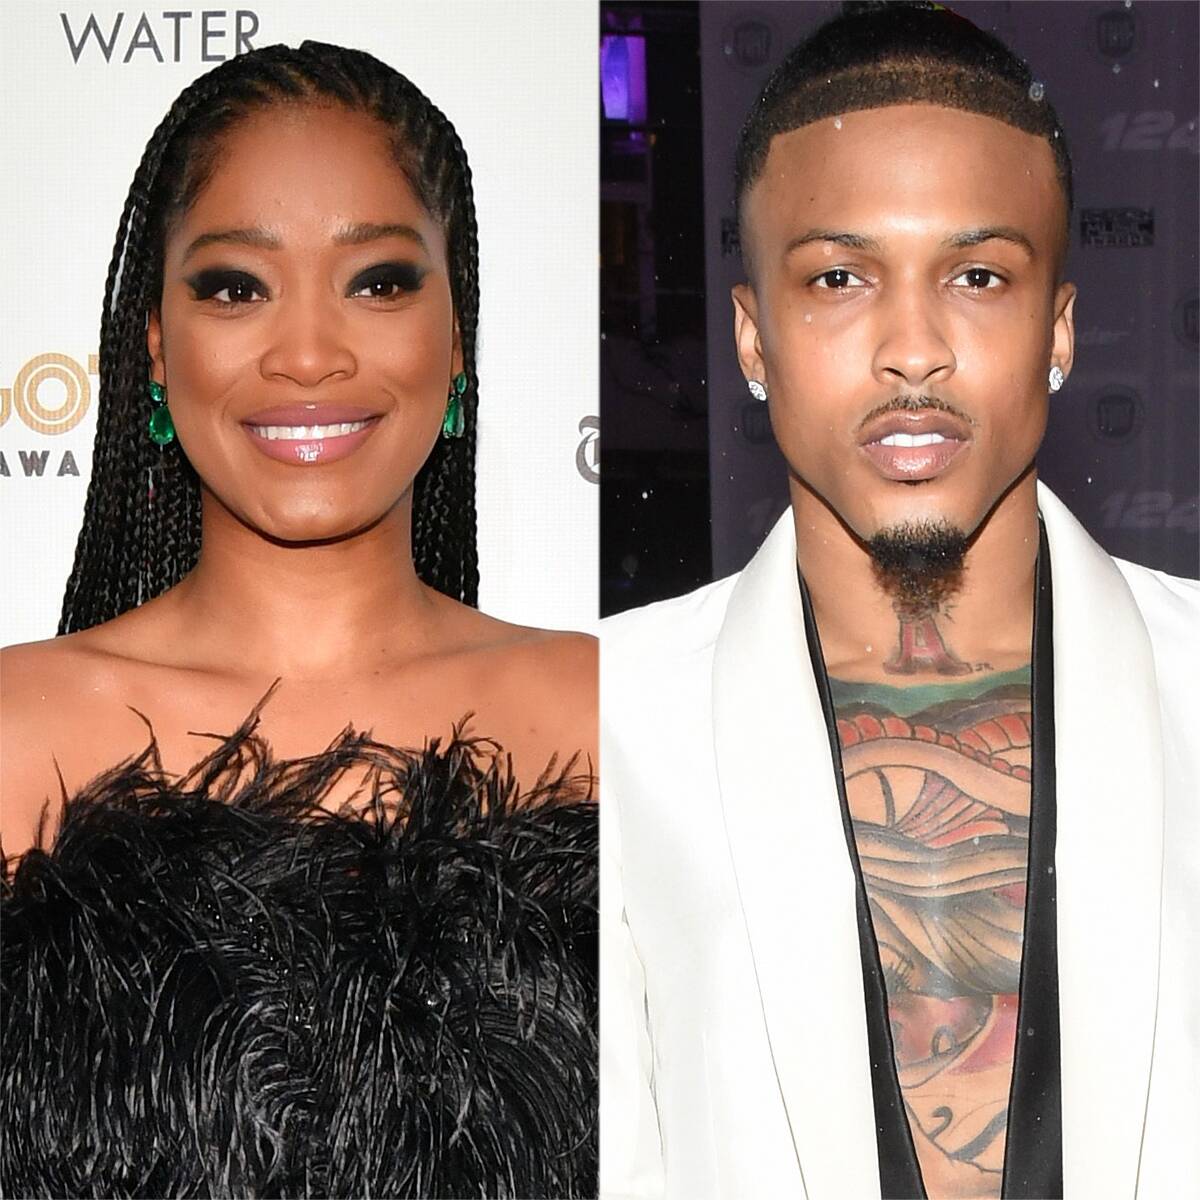 Keke Palmer Has the Classiest Response After August Alsina Slams Her On Twitter